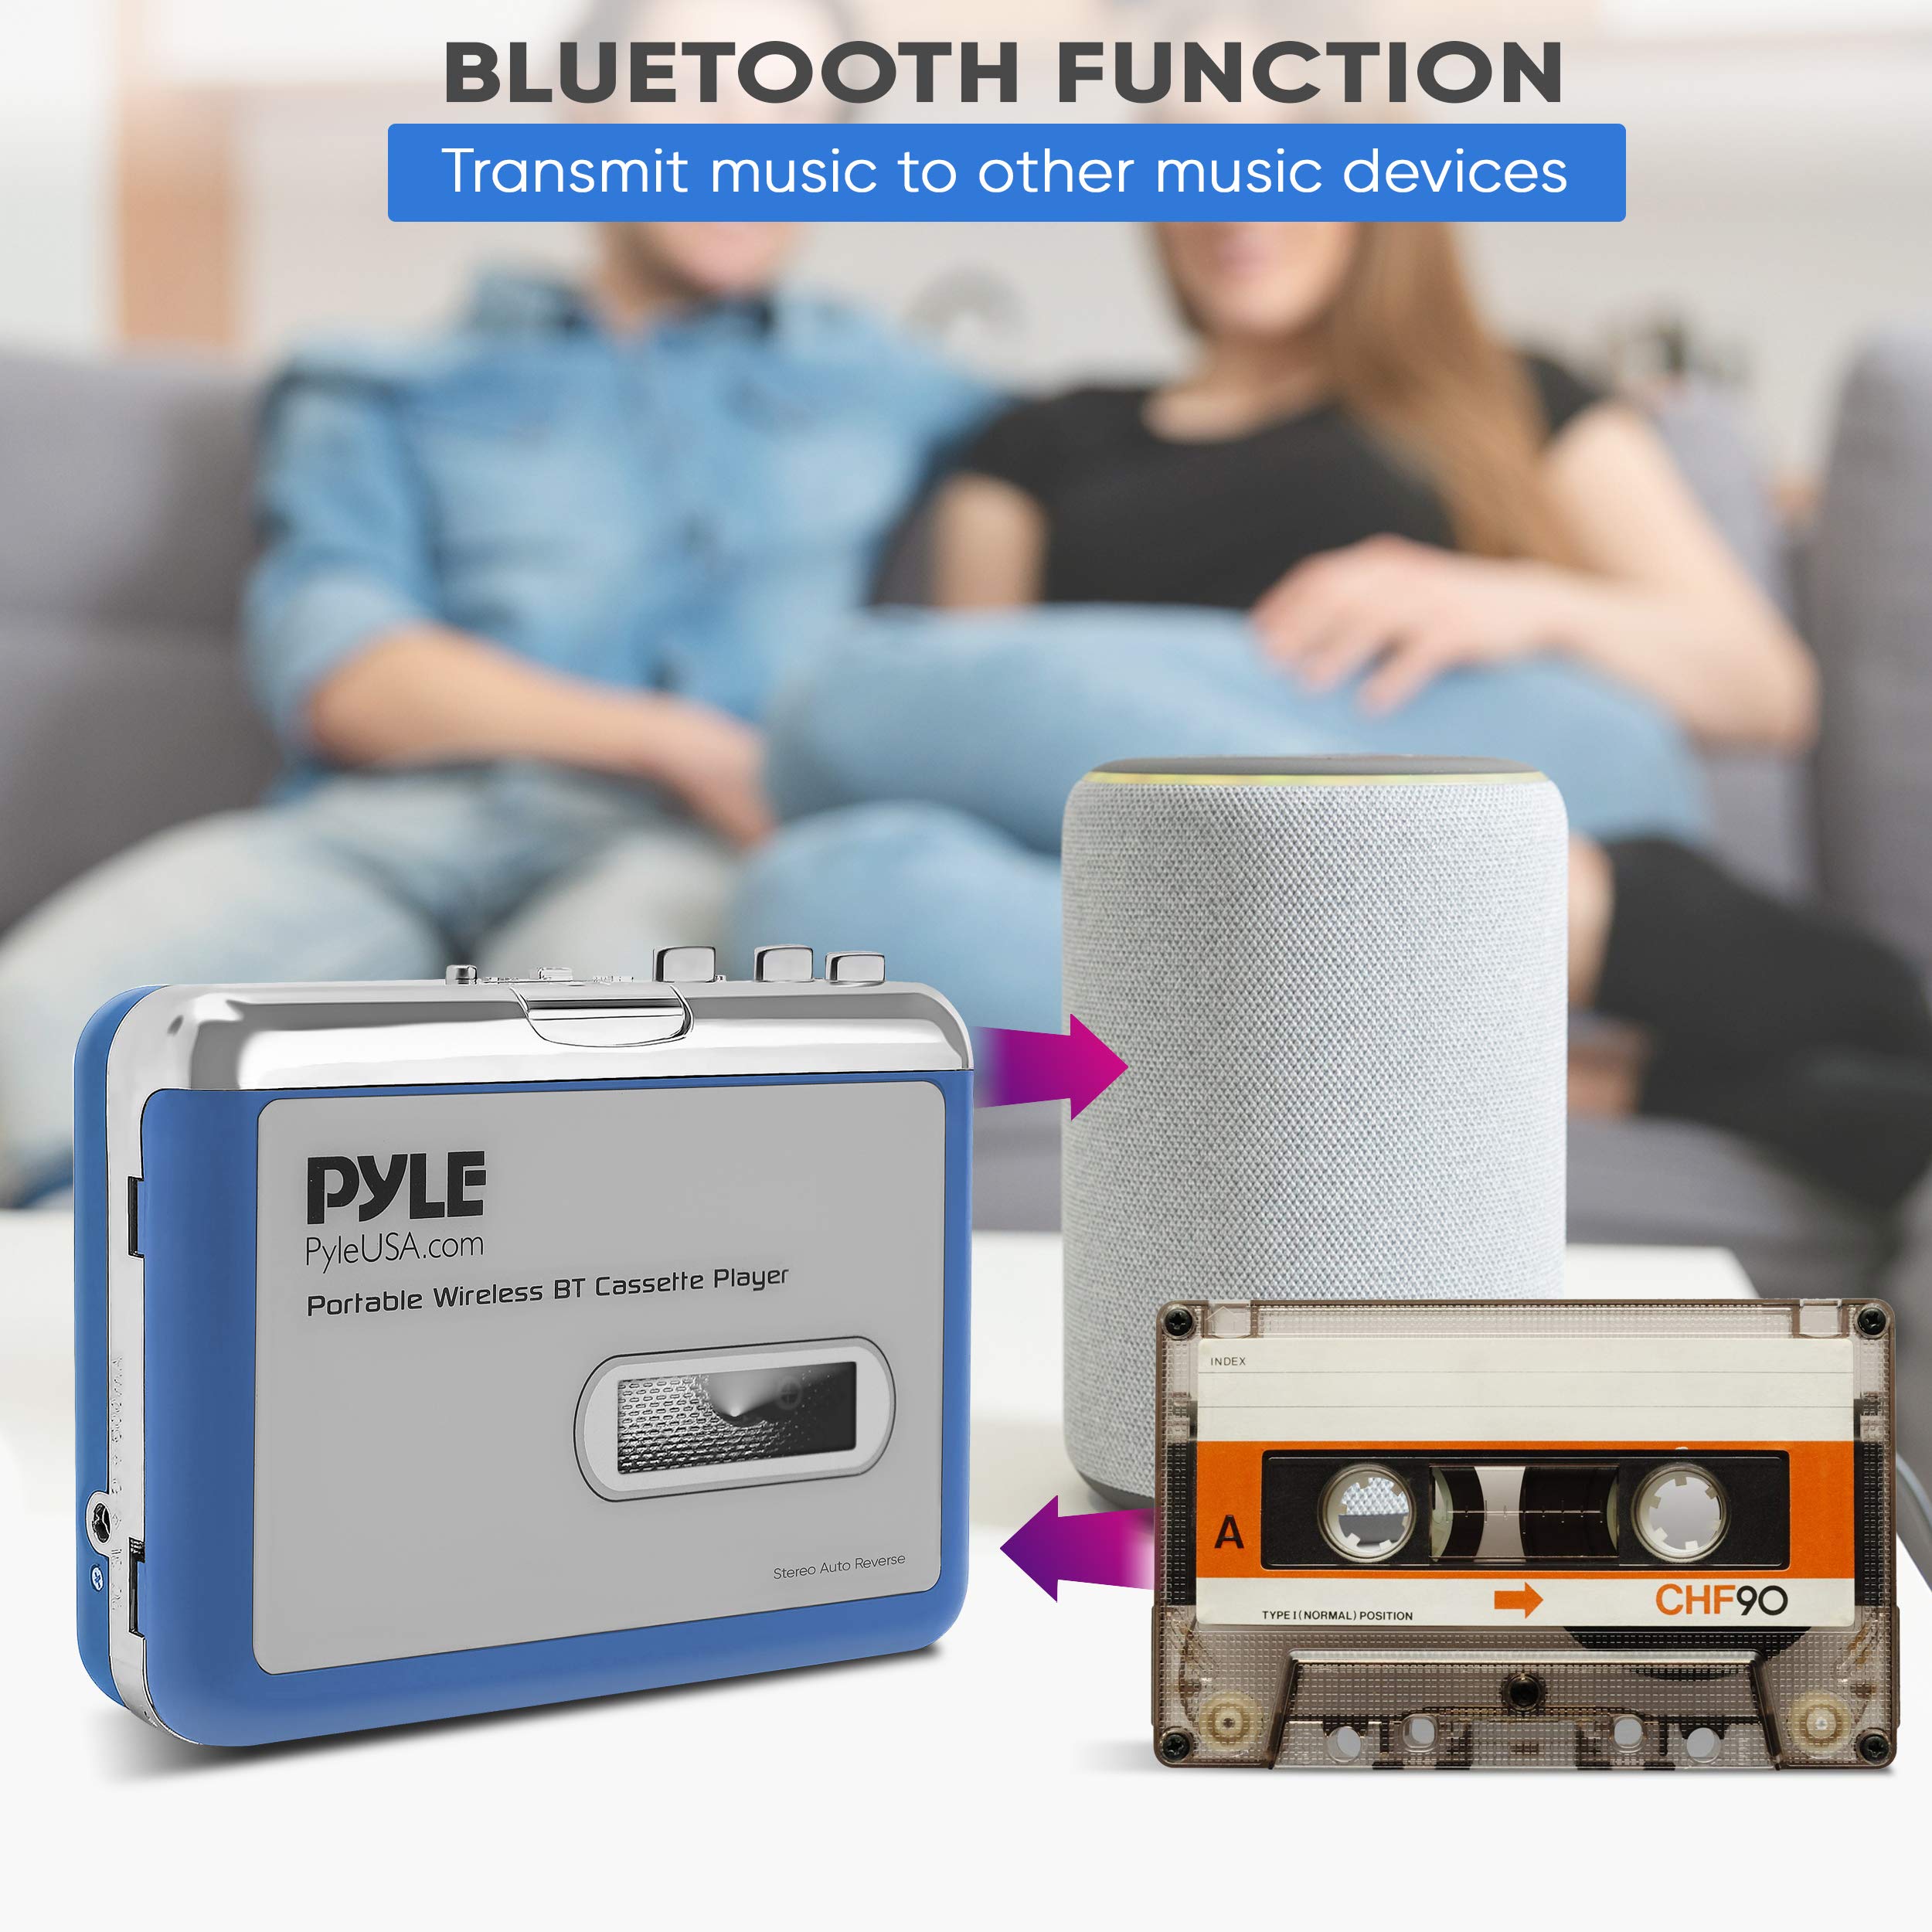 Pyle Portable Wireless BT Cassette Player - Lid Switcher, AUX Port w/LED Indicator, Auto Reverse Function, USB Cable for Power Supply, 3.5mm Earphone Jack & Bluetooth Transmitter - Pyle PCASRSD18BT